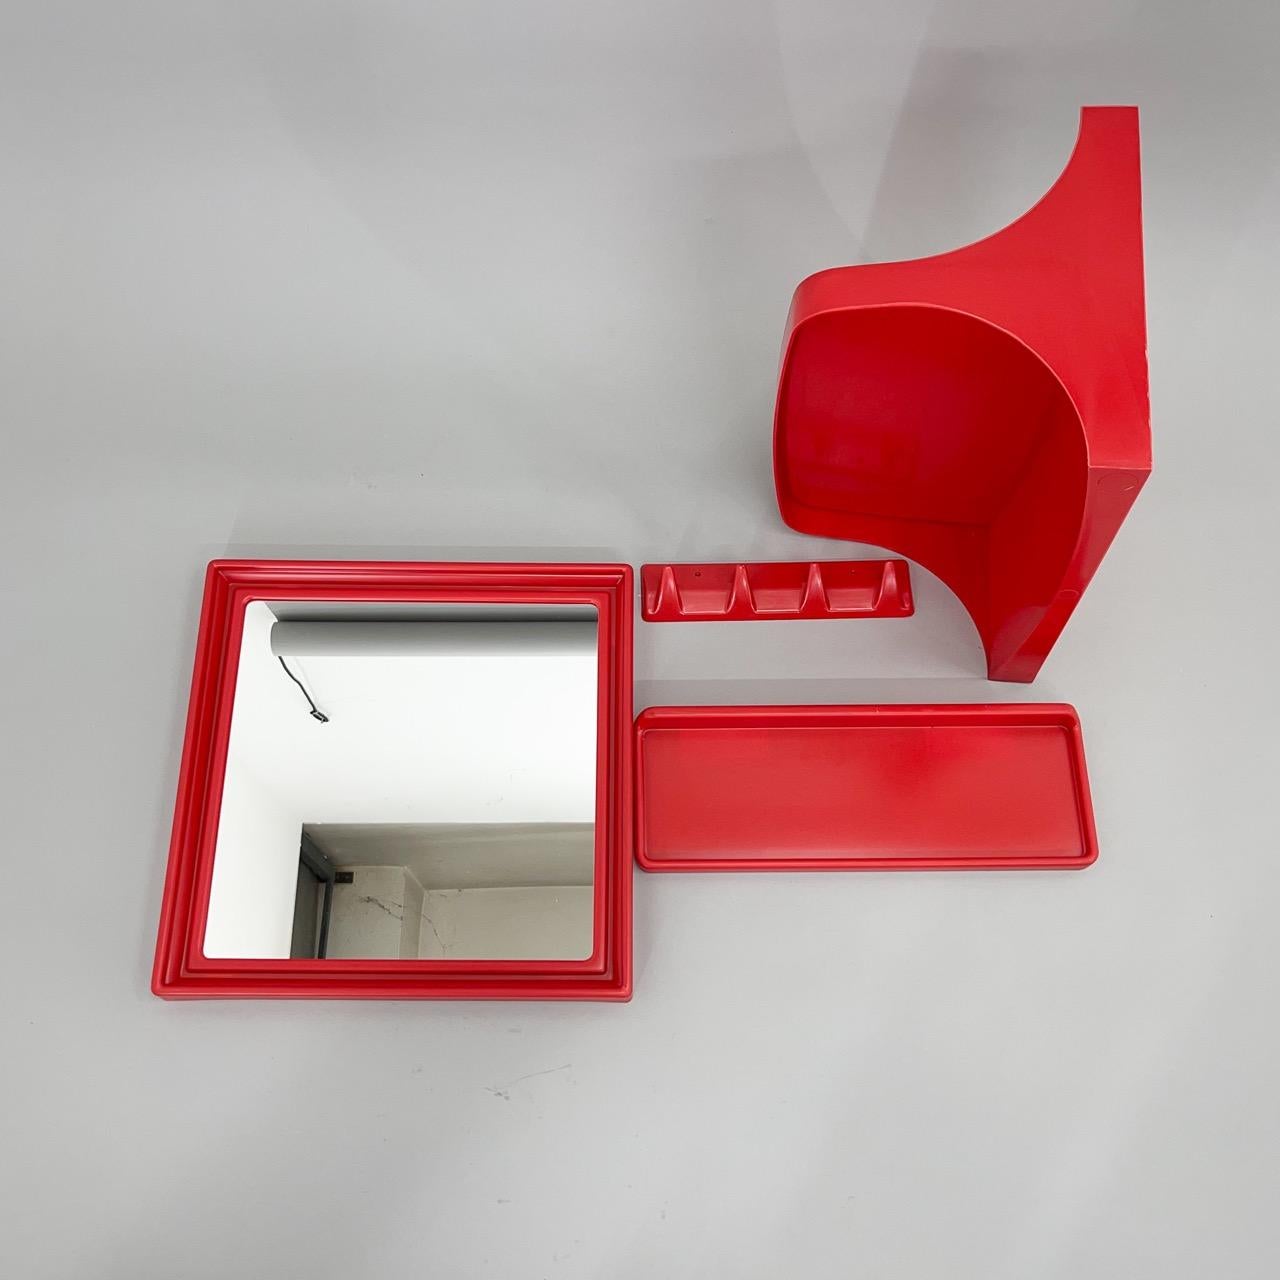 Four piece set made of plastic in a very nice red colour. Beautiful collection from the 1970's. 
The Mirror is 40 cm wide and 40 cm high, the hanger is 26 cm long, 6 cm high, the smaller shelf is 40 cm long and 14 cm deep, the larger shelf is also